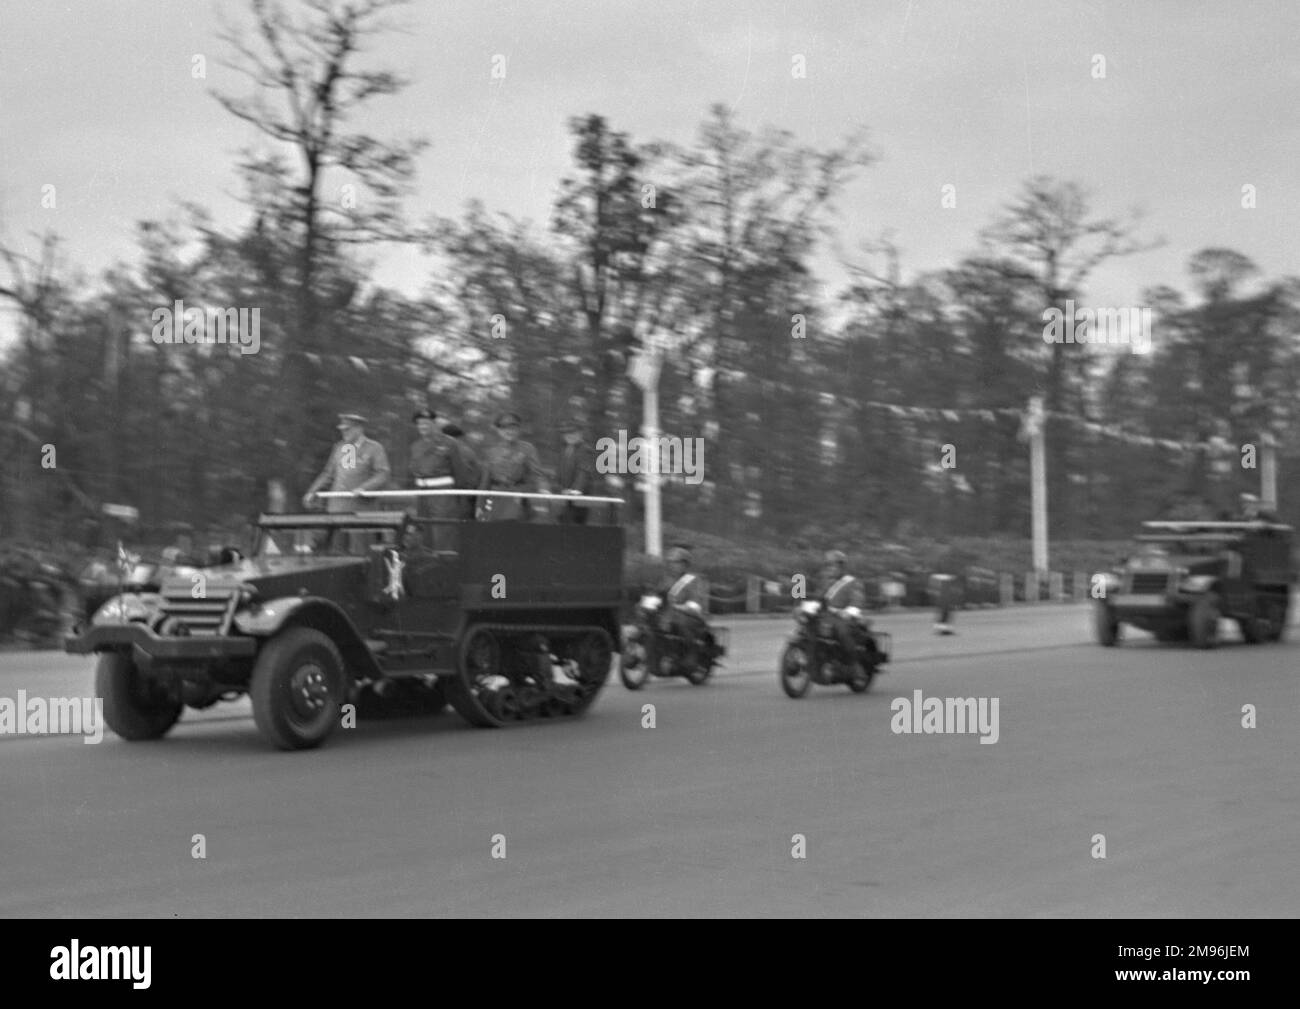 A military parade with jeeps and motorbikes. Stock Photo